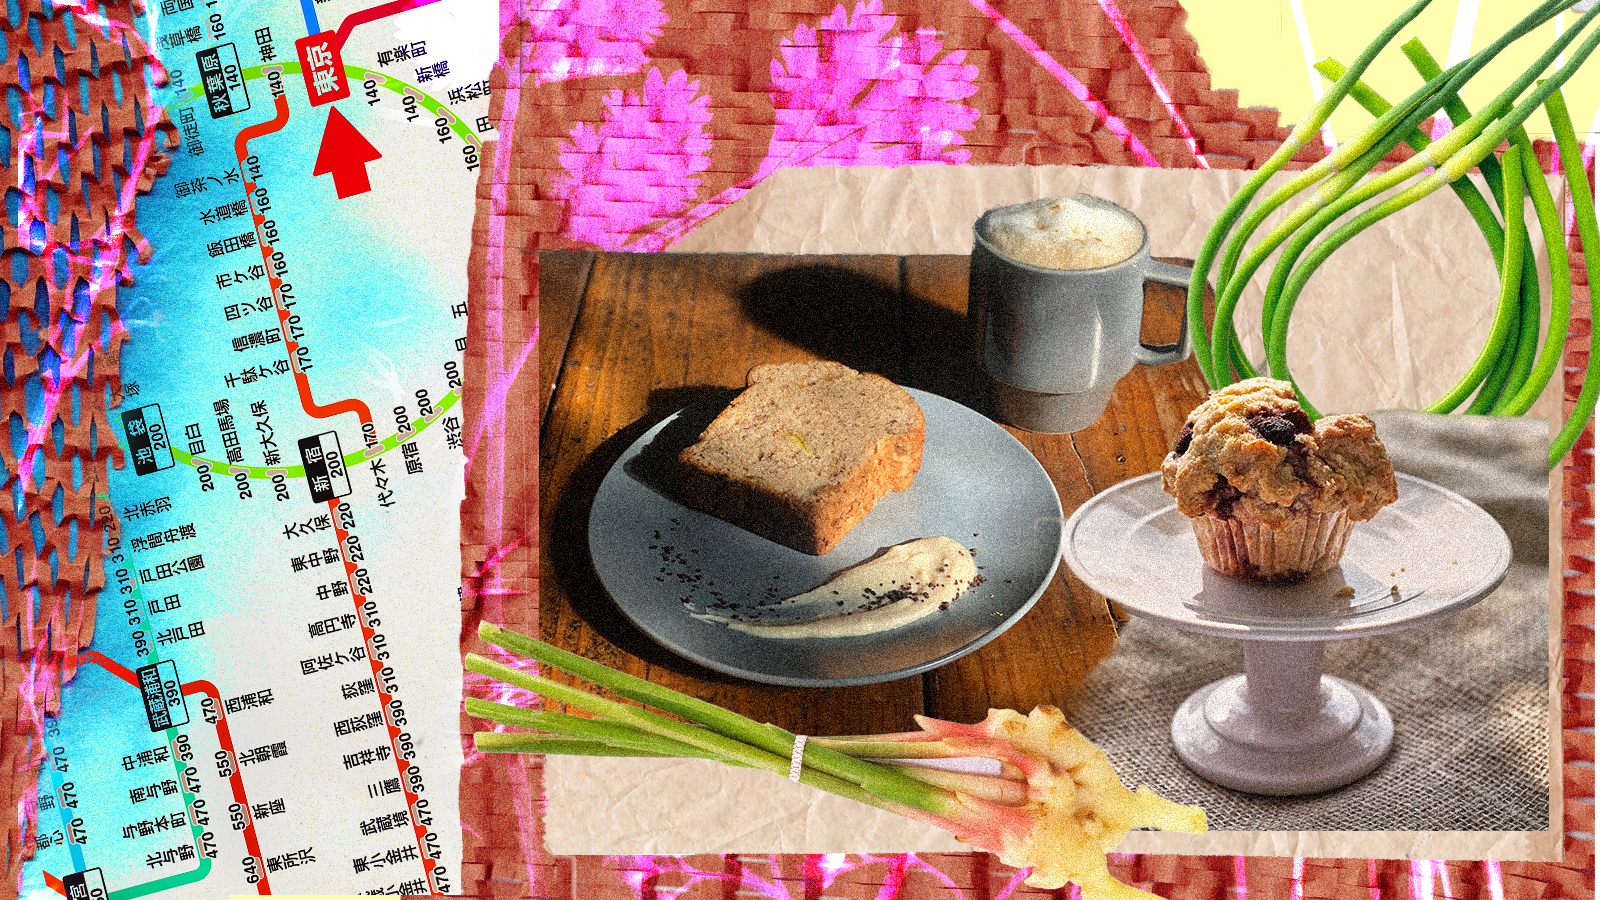 A photocollage featuring images of sliced sweet bread and a muffin, overlayed on a subway map and shots of plants.